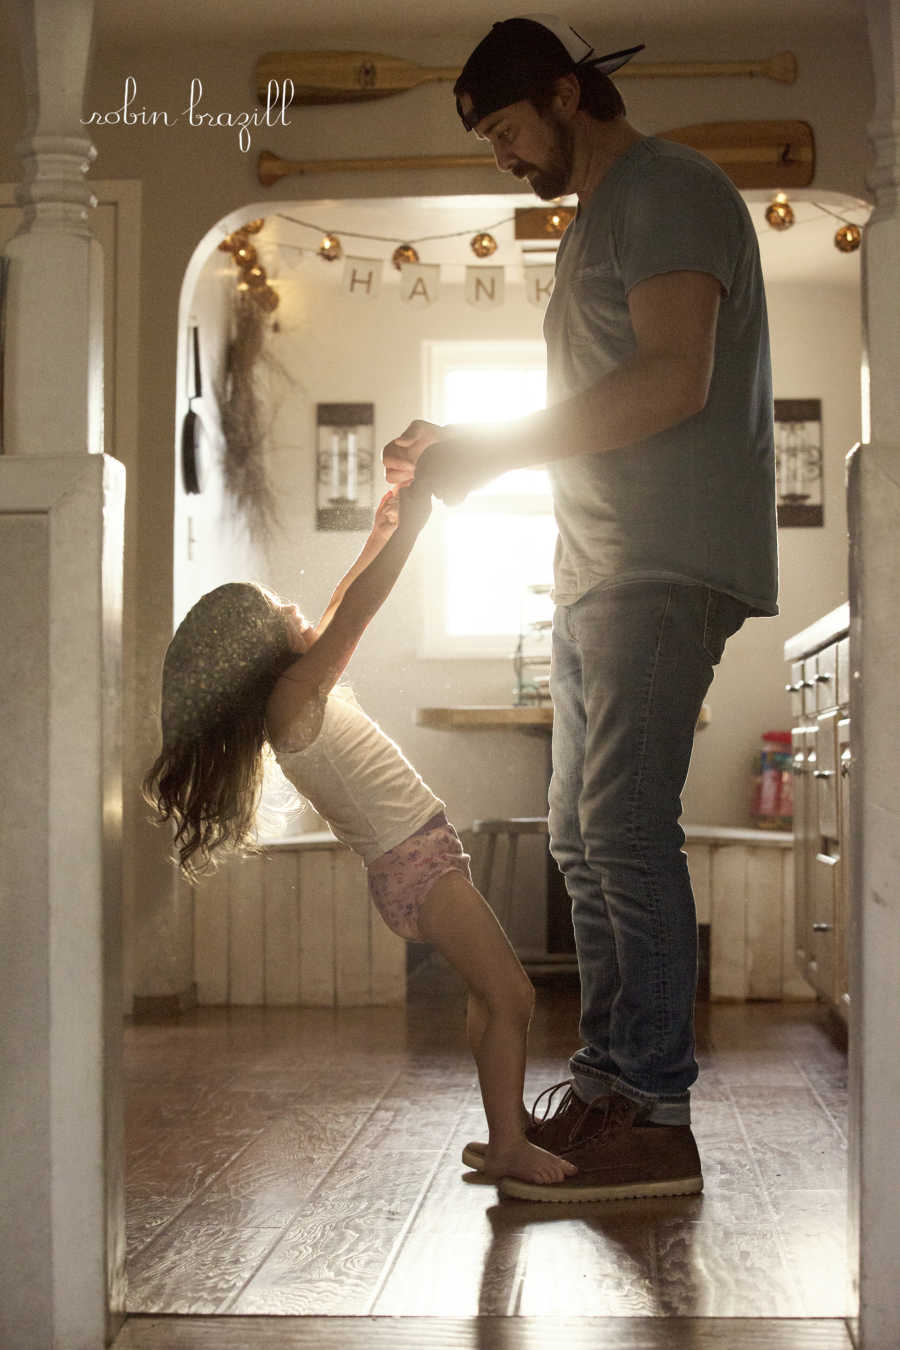 Man holding stepdaughters hands as she stands on his feet